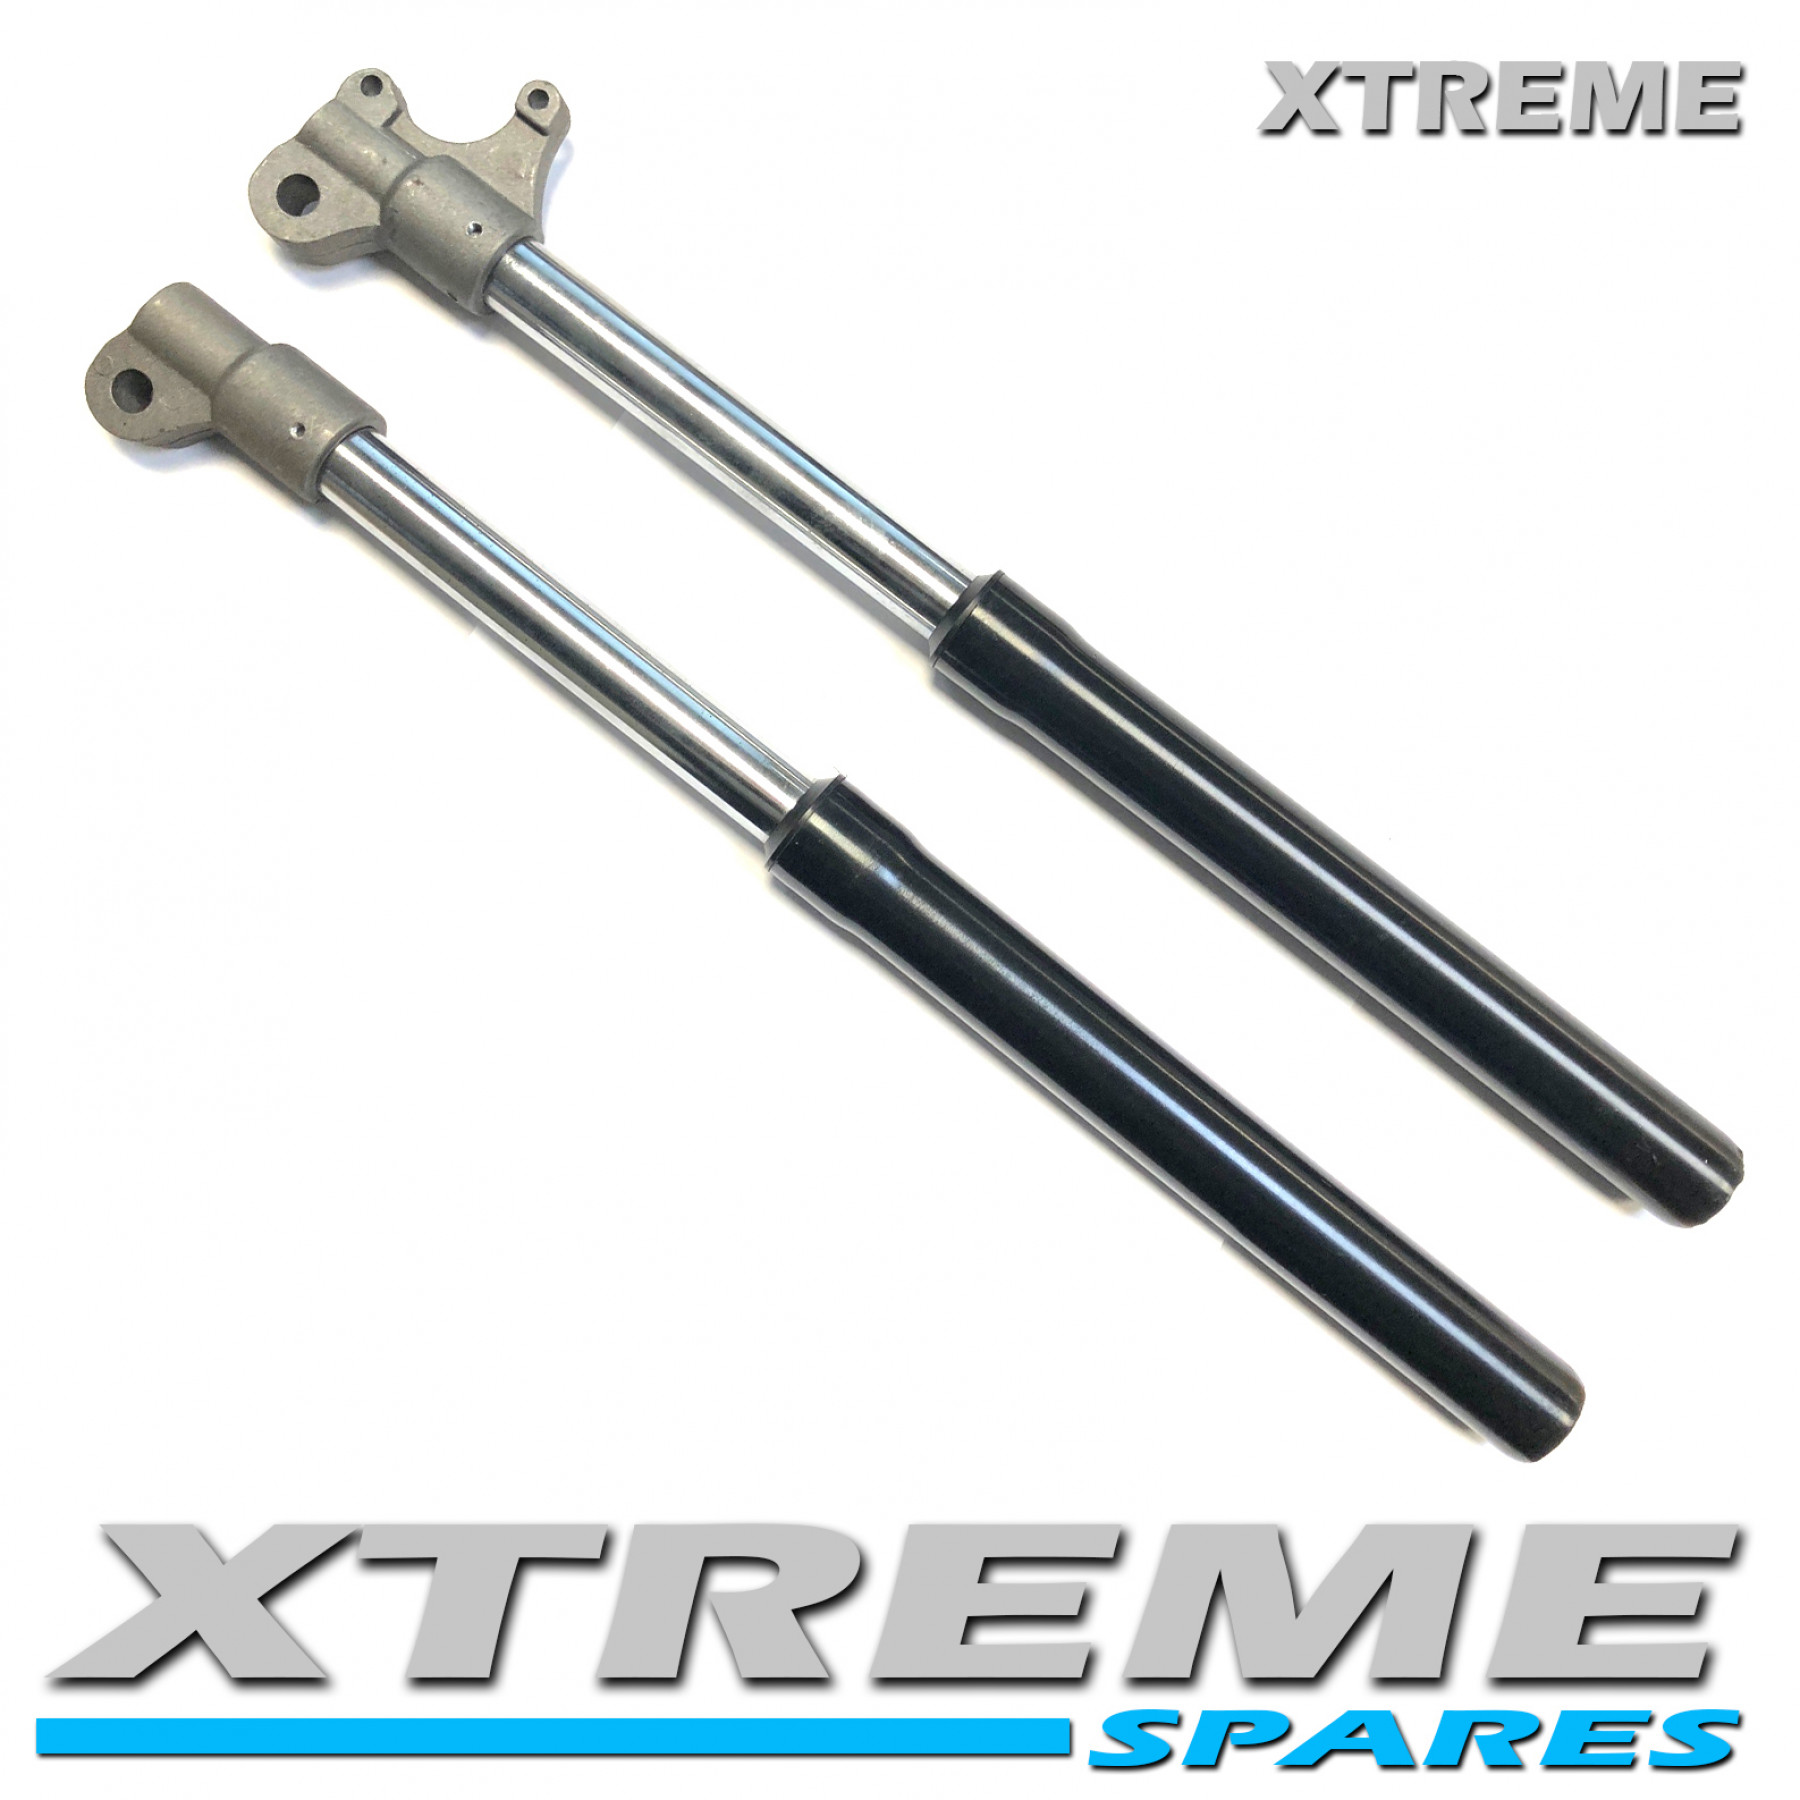 XTM PRO-RIDER COMPLETE REPLACEMENT FRONT FORK SHOCKERS SET